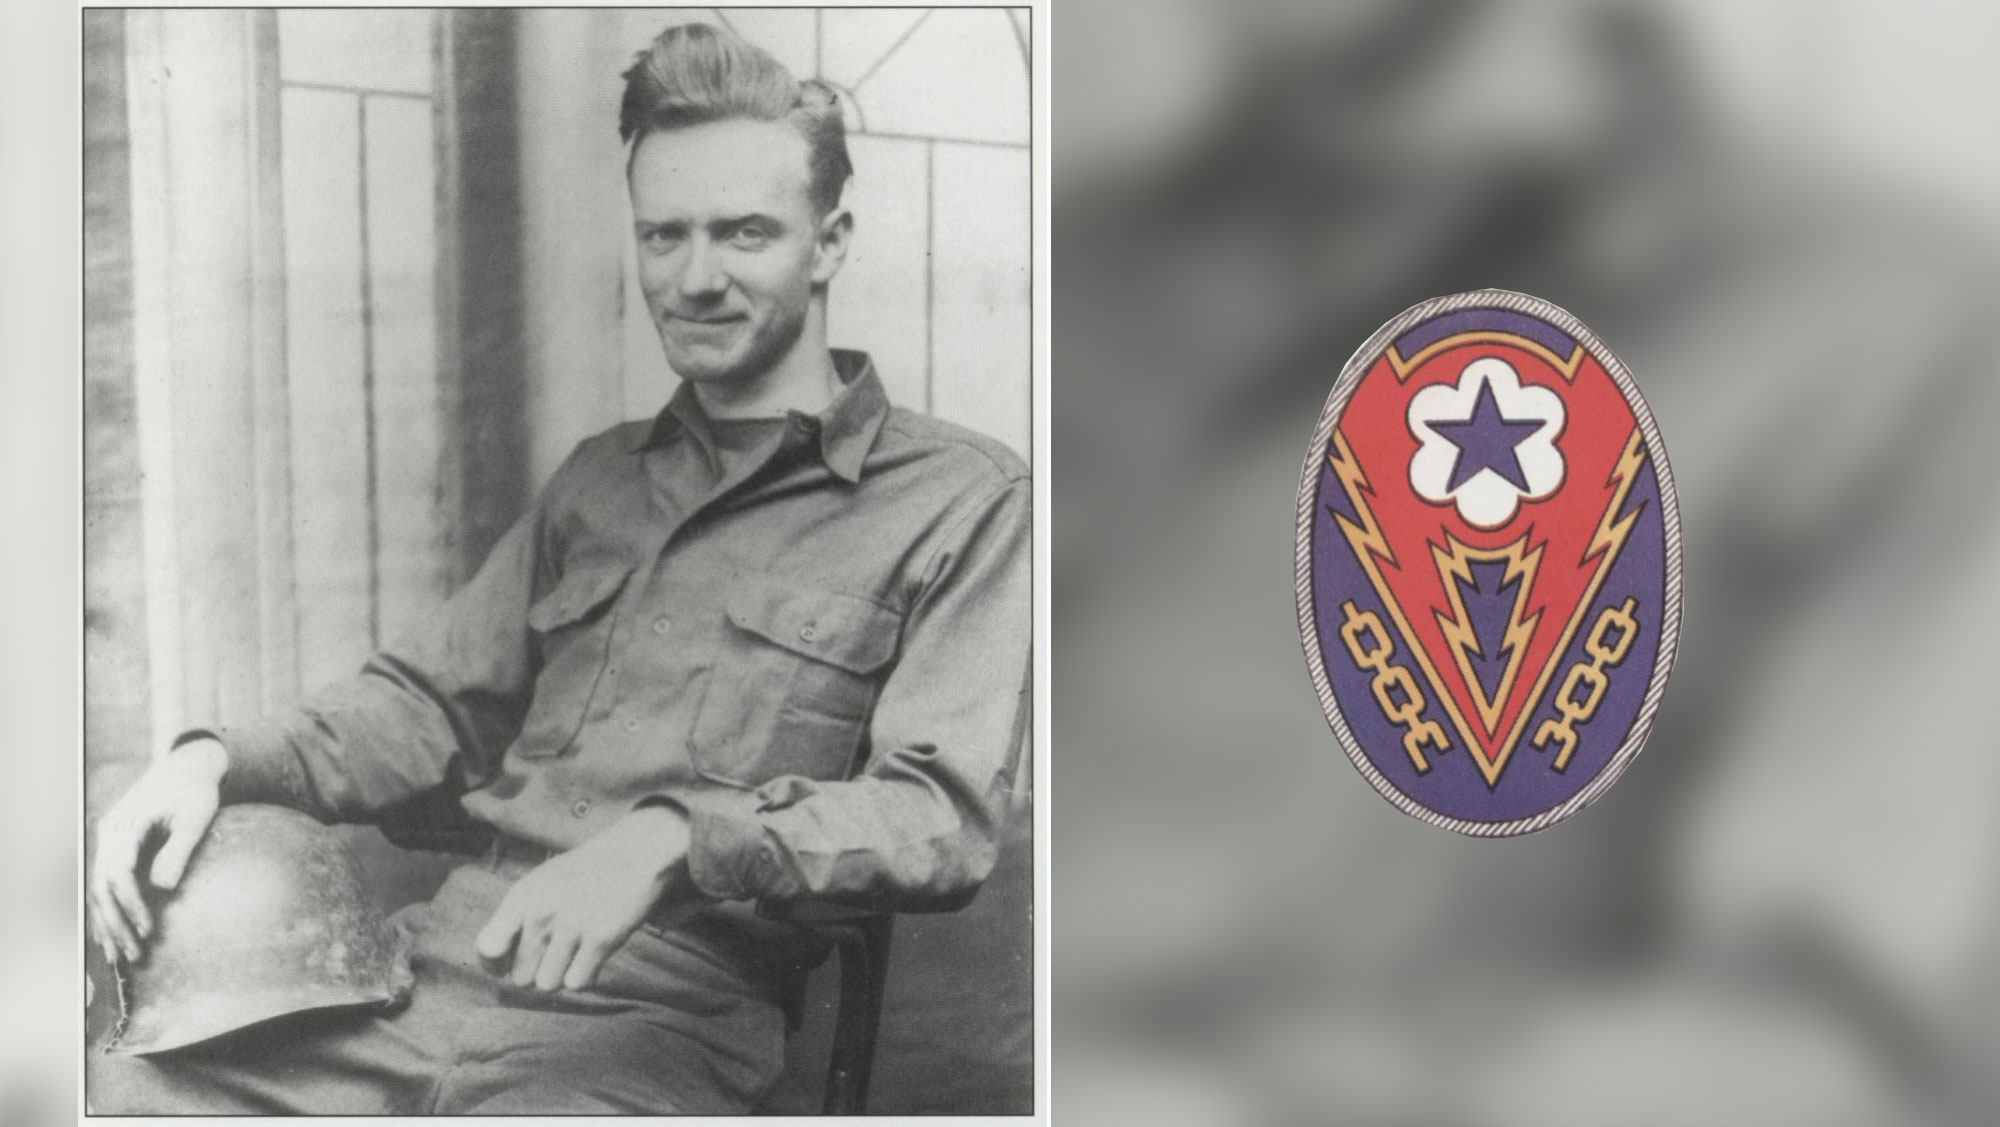 (left) The author and his steel helmet that doubled as a washbasin and shower. Courtesy of Joe Weeks (right) Patch worn by the men of the 718th.